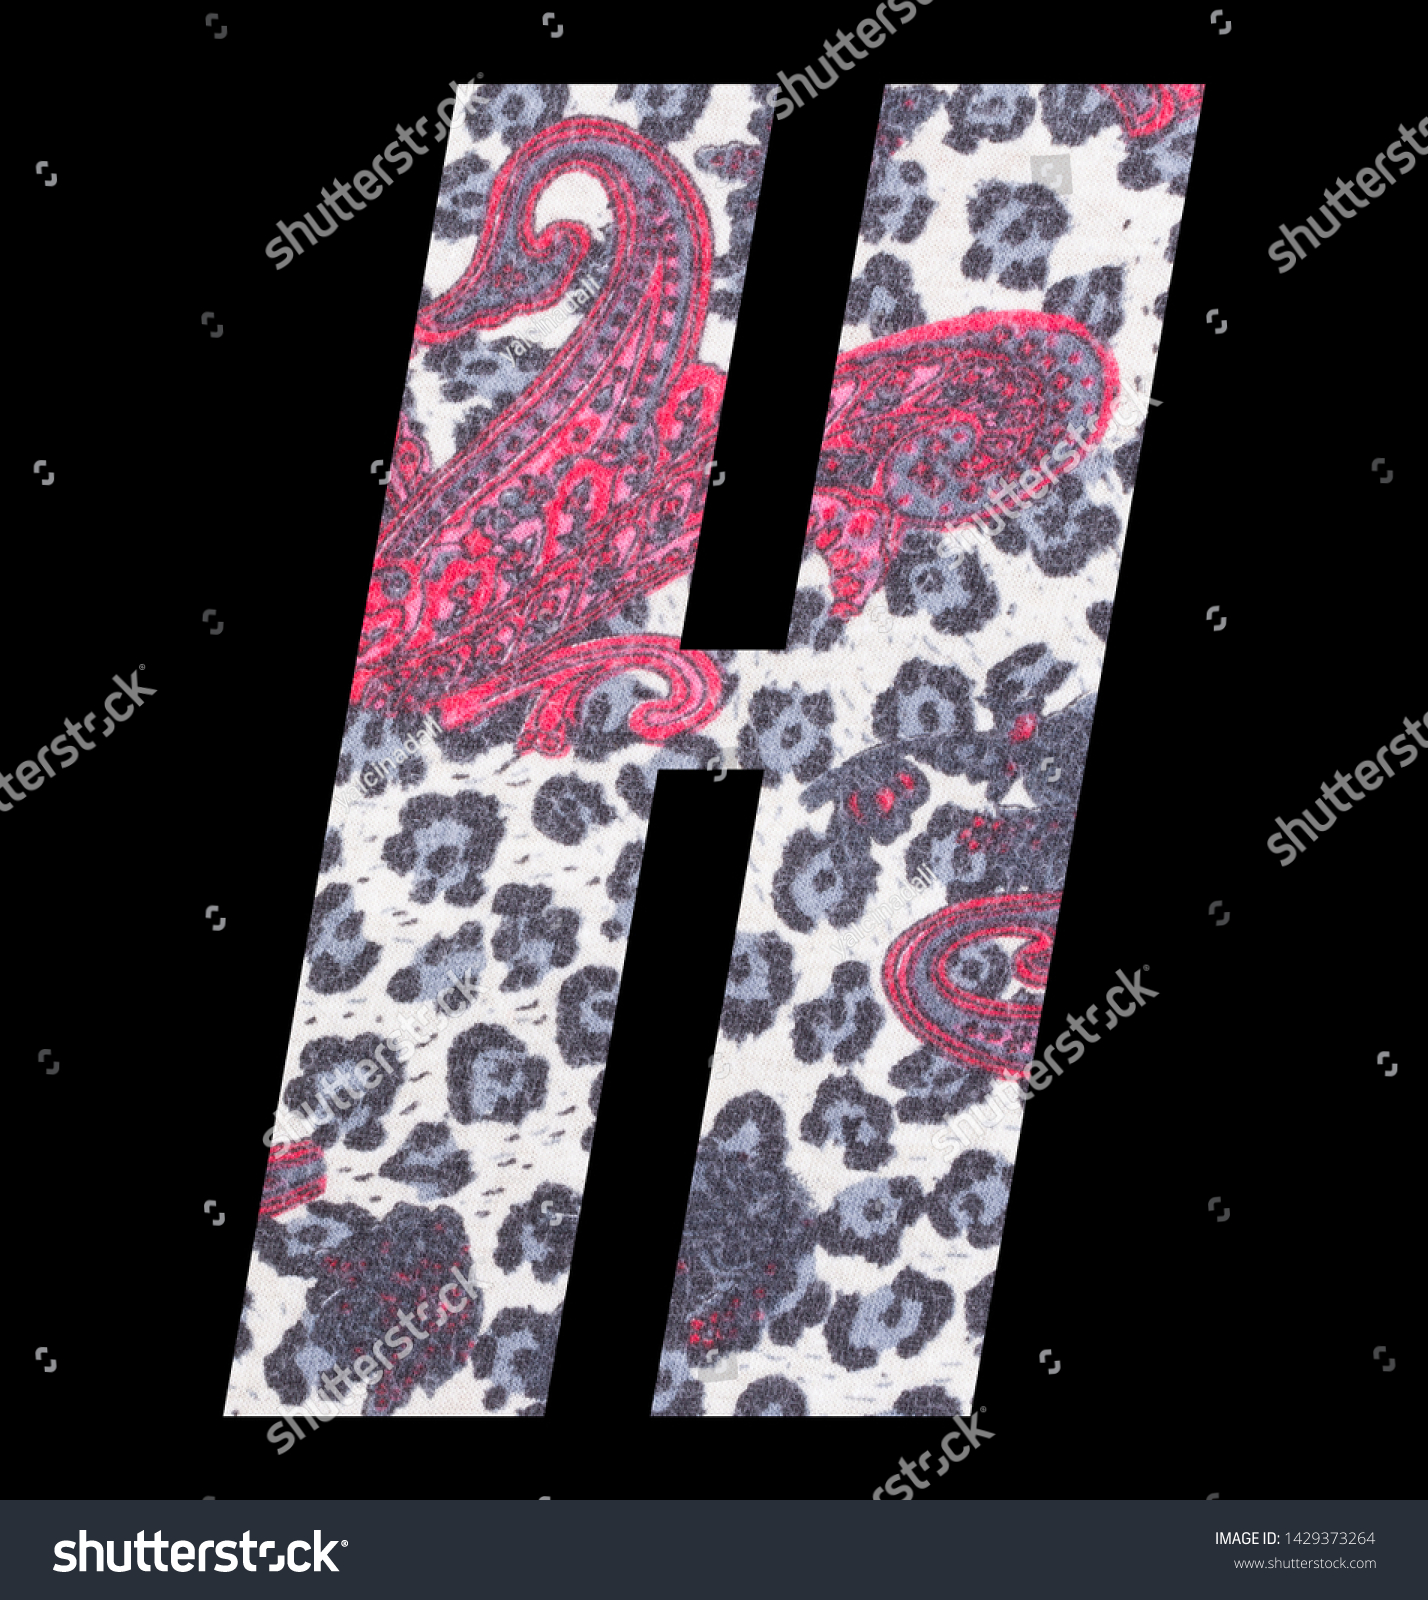 Letter H alphabet with floral fabric texture on black background #1429373264